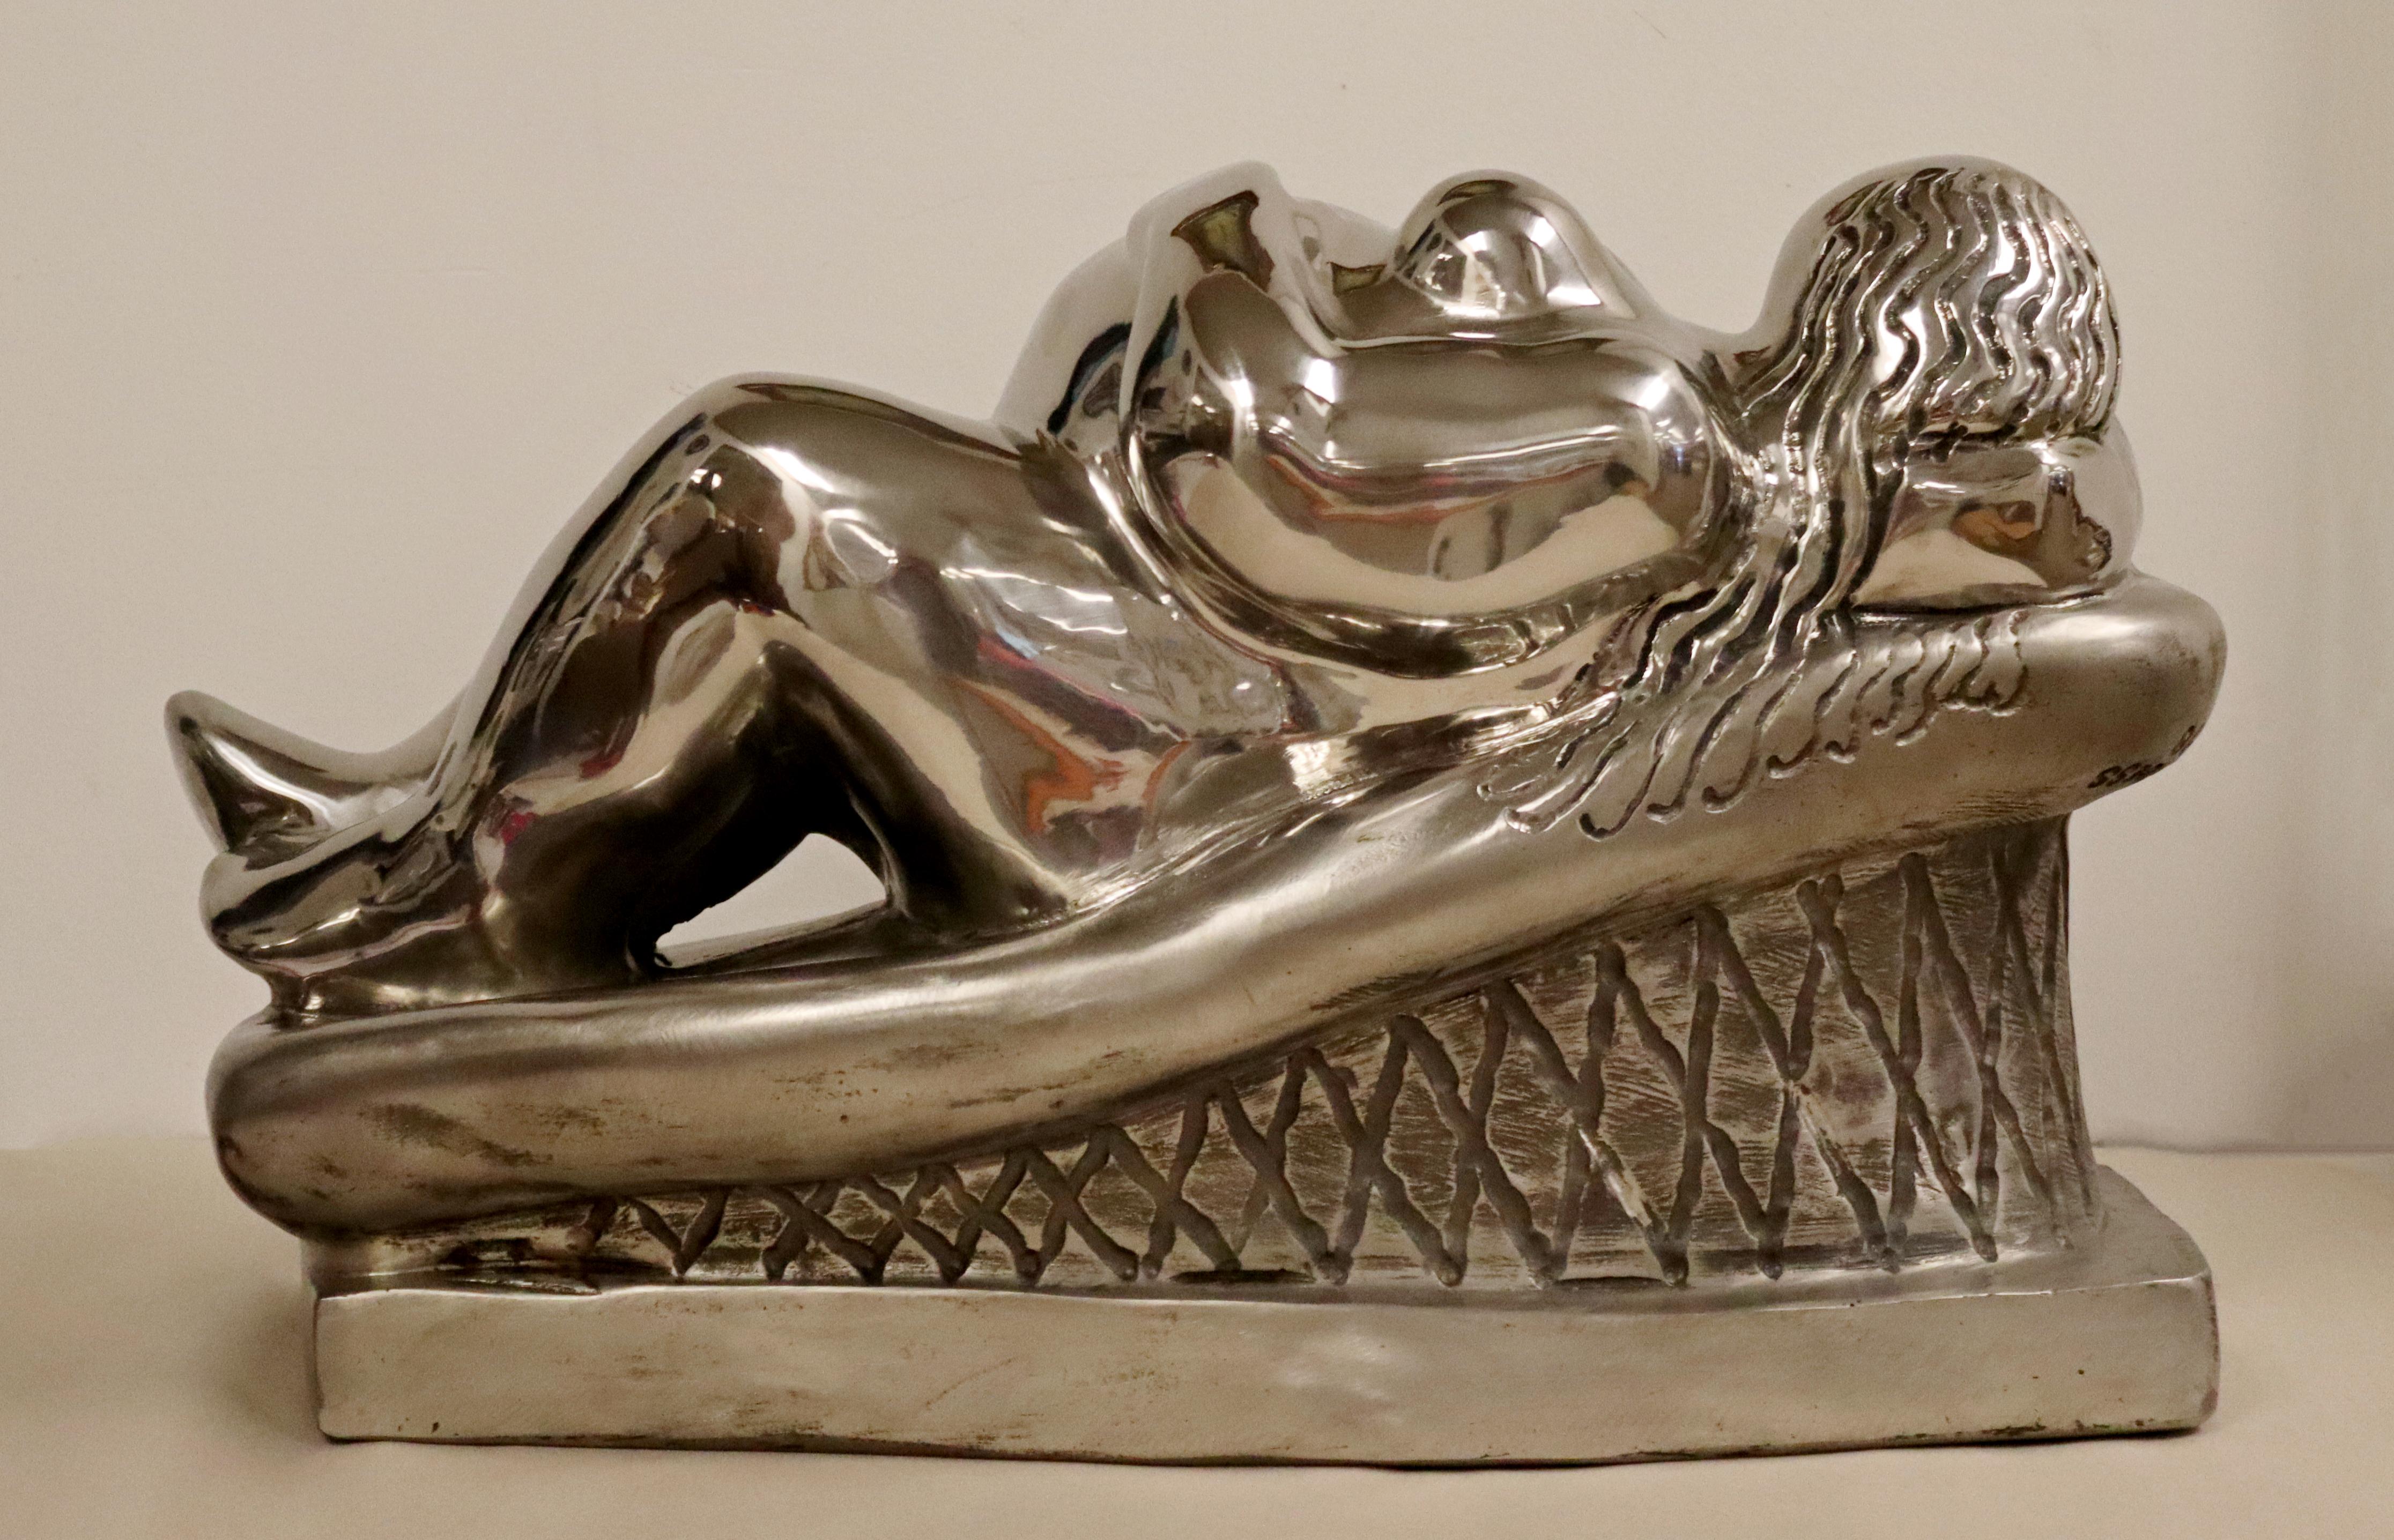 Contemporary Stainless Steel Little Goddess Table Sculpture by Jerry Soble 1990s For Sale 2